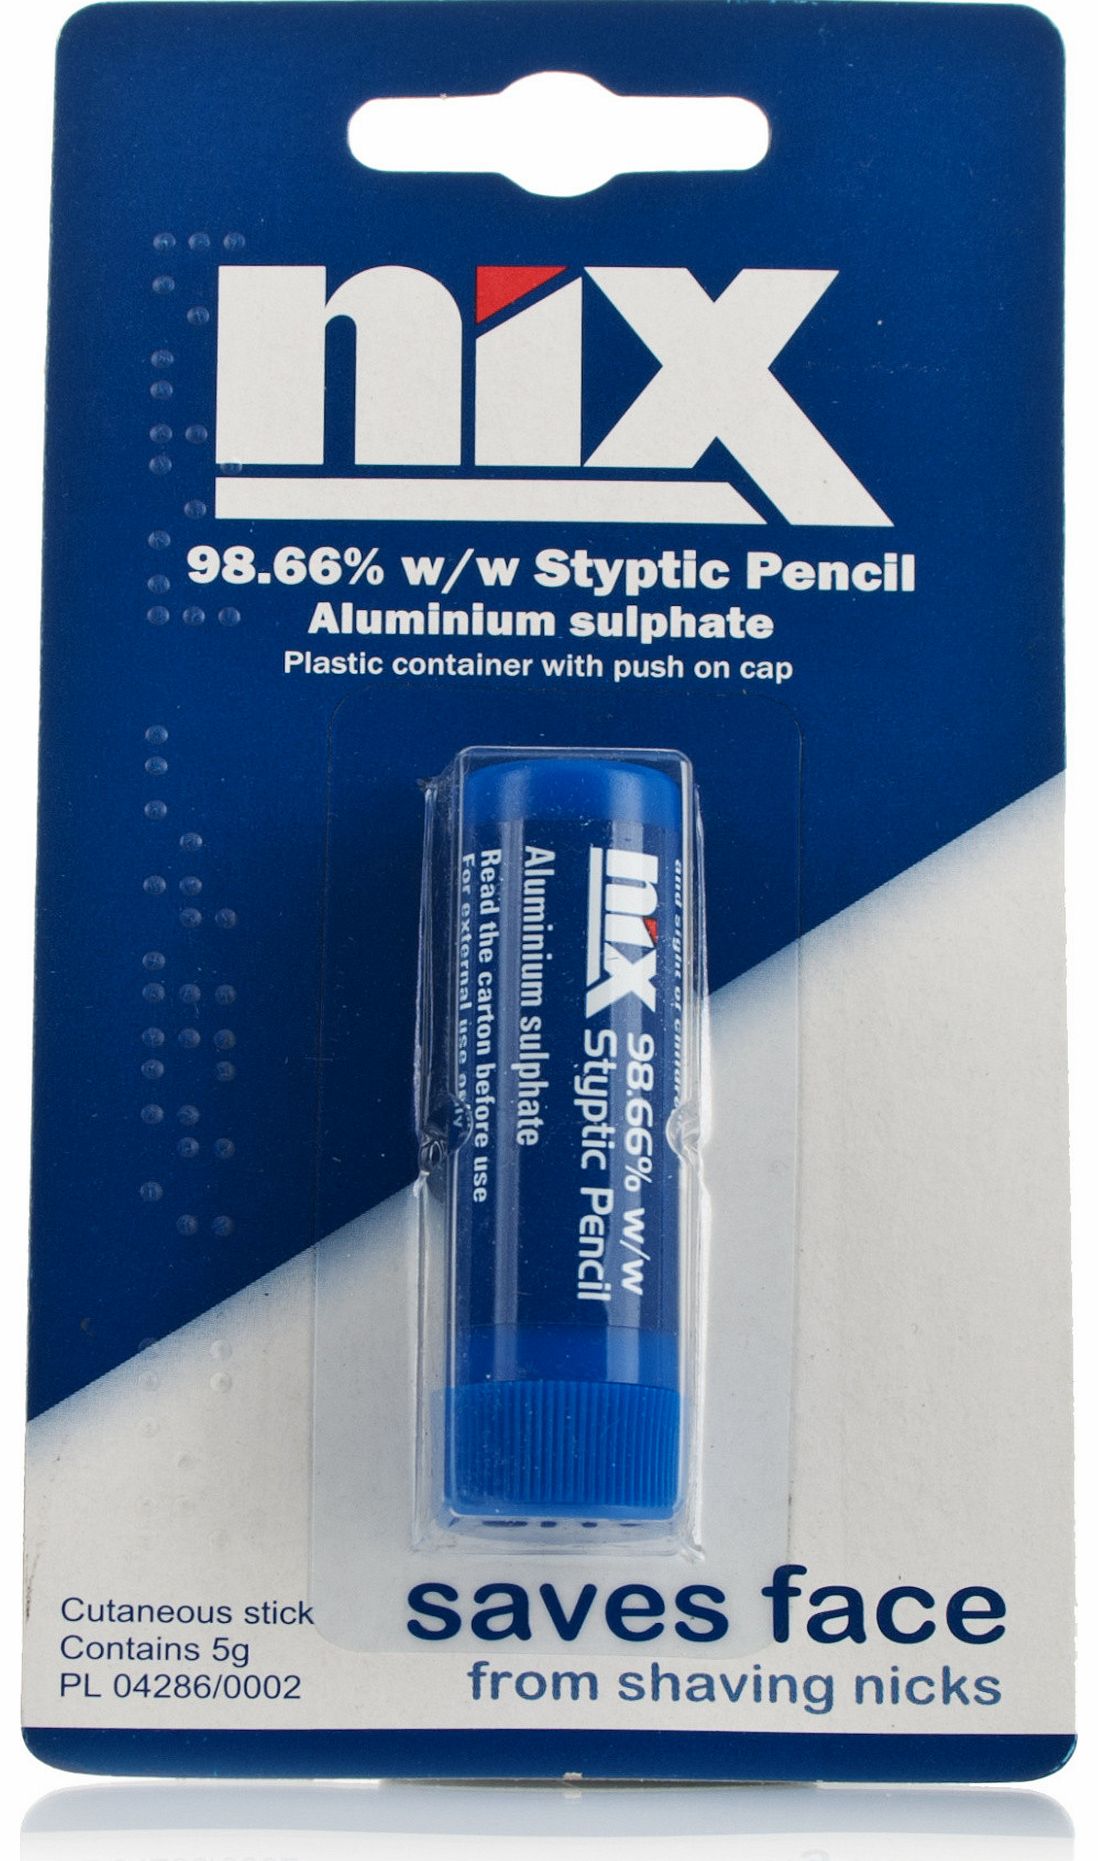 Nix STYPTIC PENCIL Saves Face